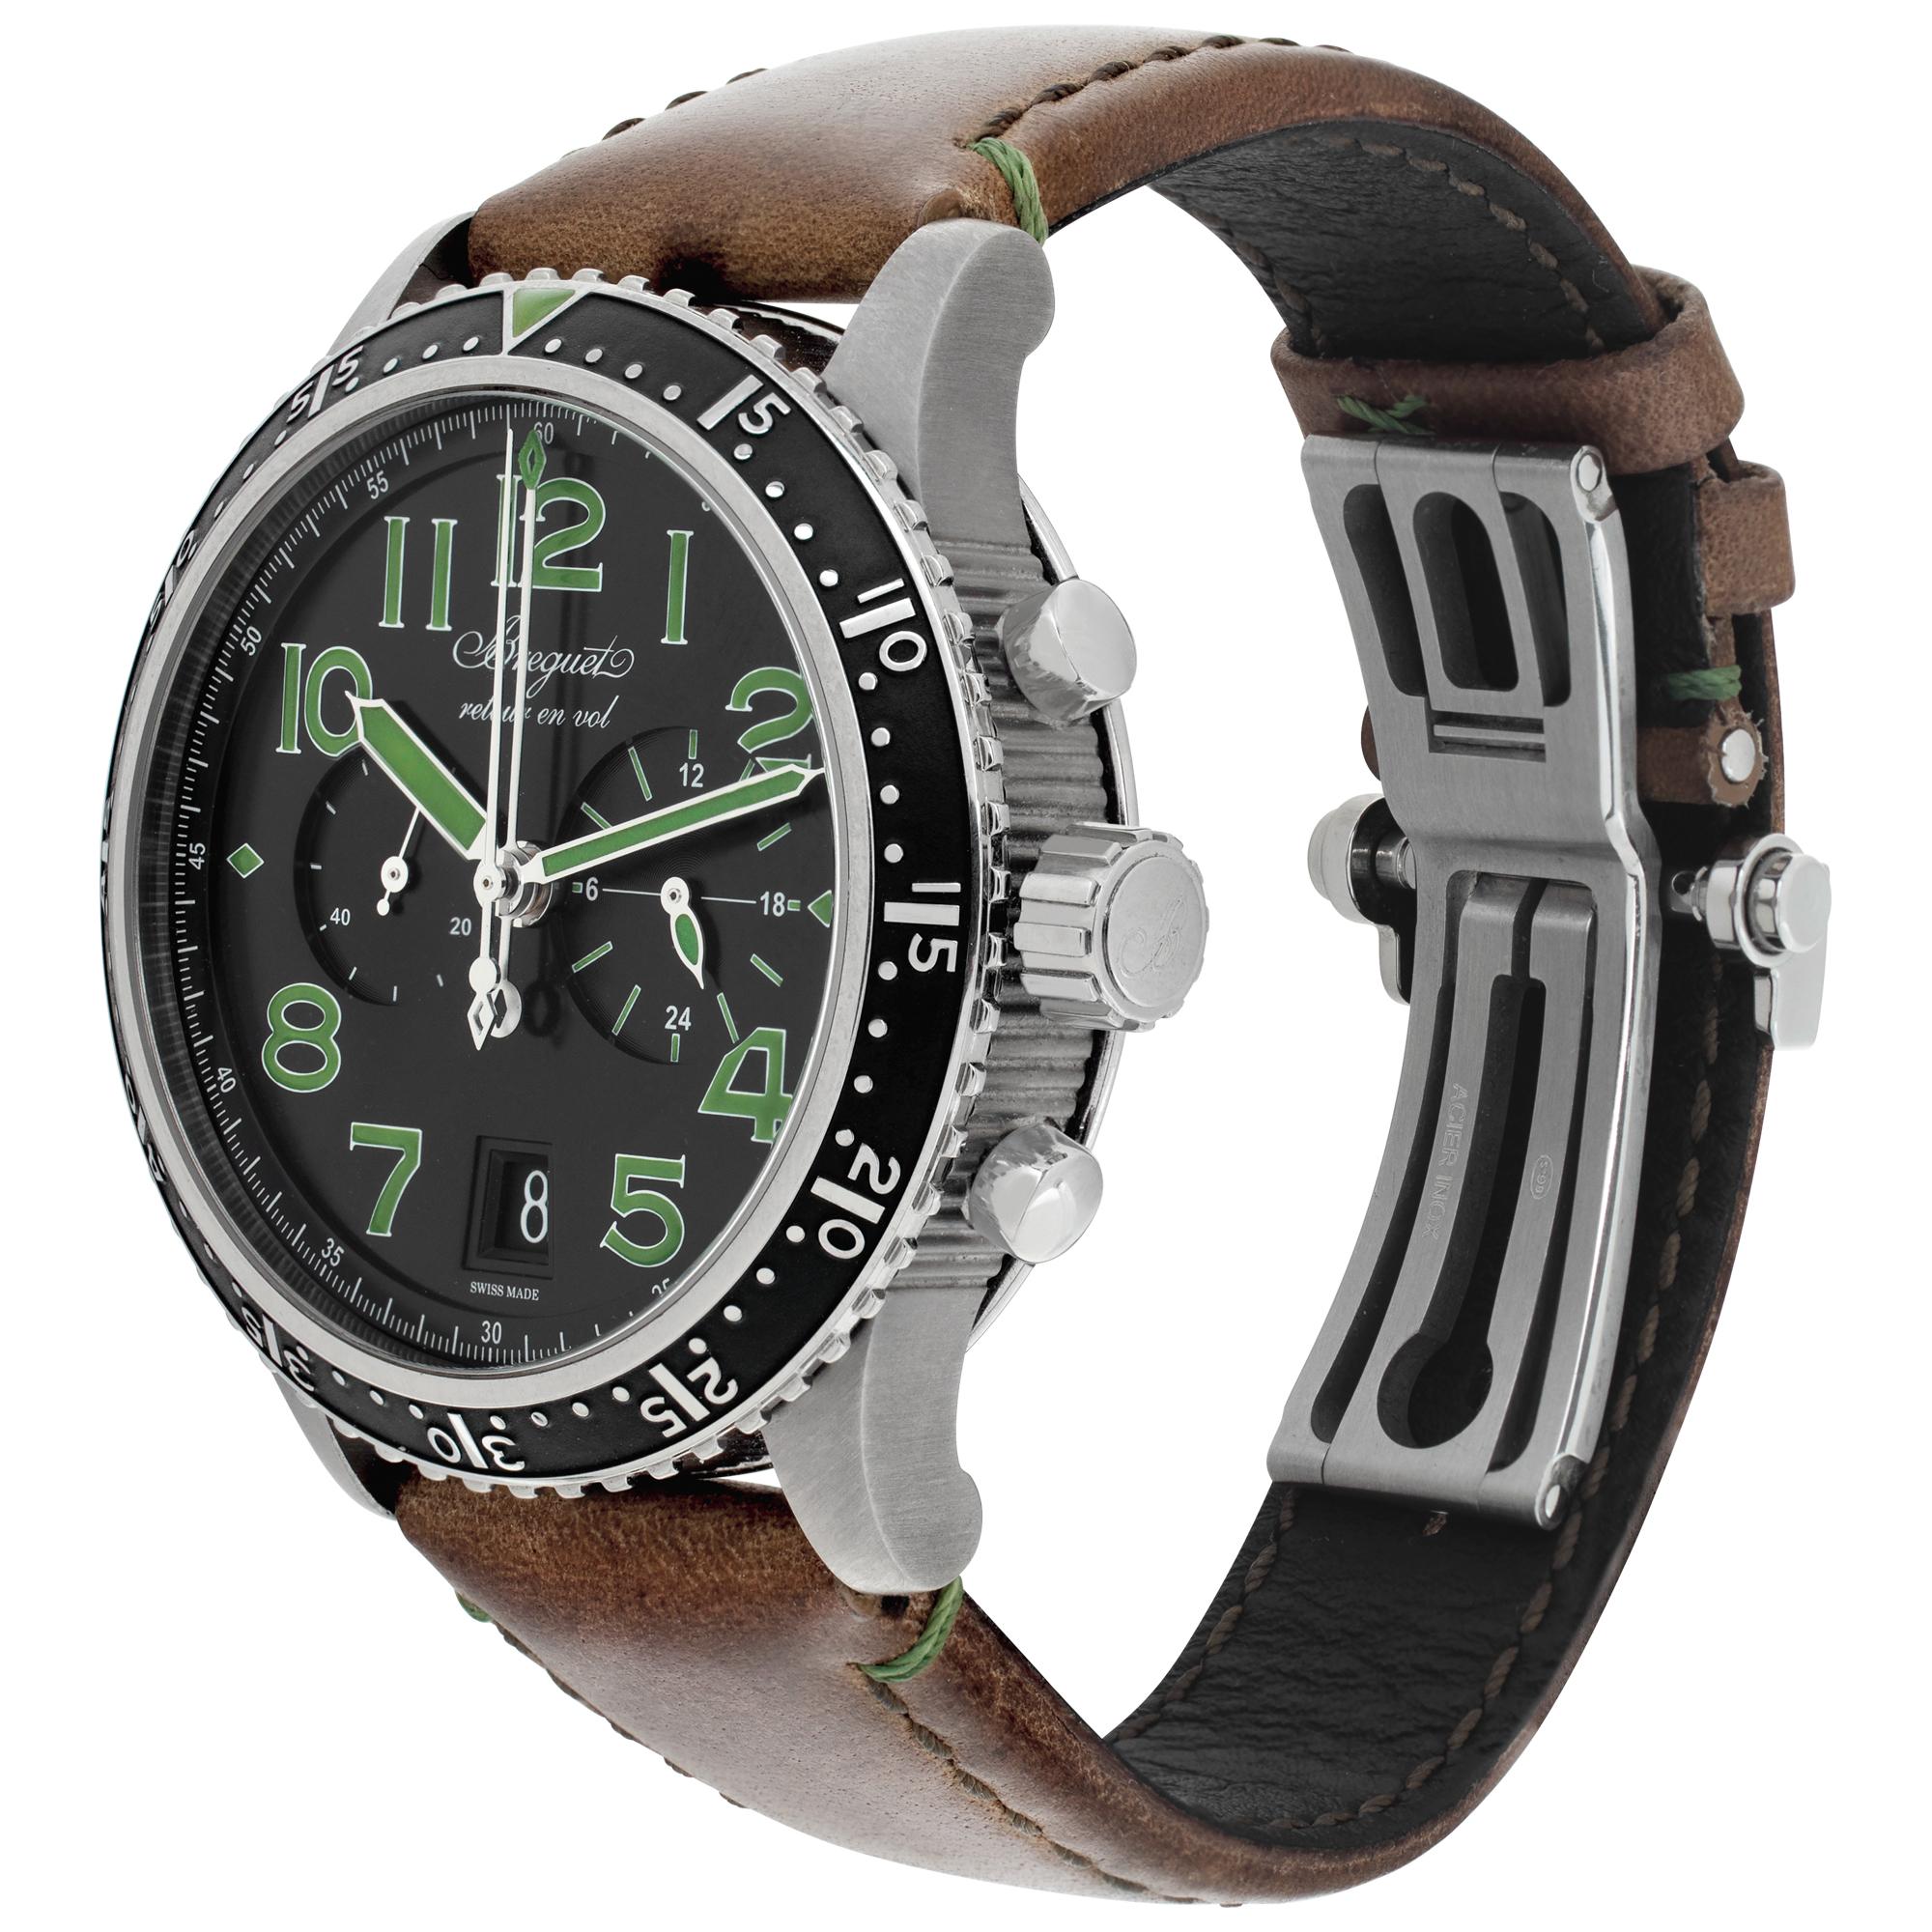 Limited Edition Breguet Type XXI Flyback Chronograph in titanium with black dial and green Arabic numeral hour markers on brown leather strap. Auto w/ subseconds, date and chronograph. 42 mm case size. With box and papers. Ref 3815. Only 250 pieces